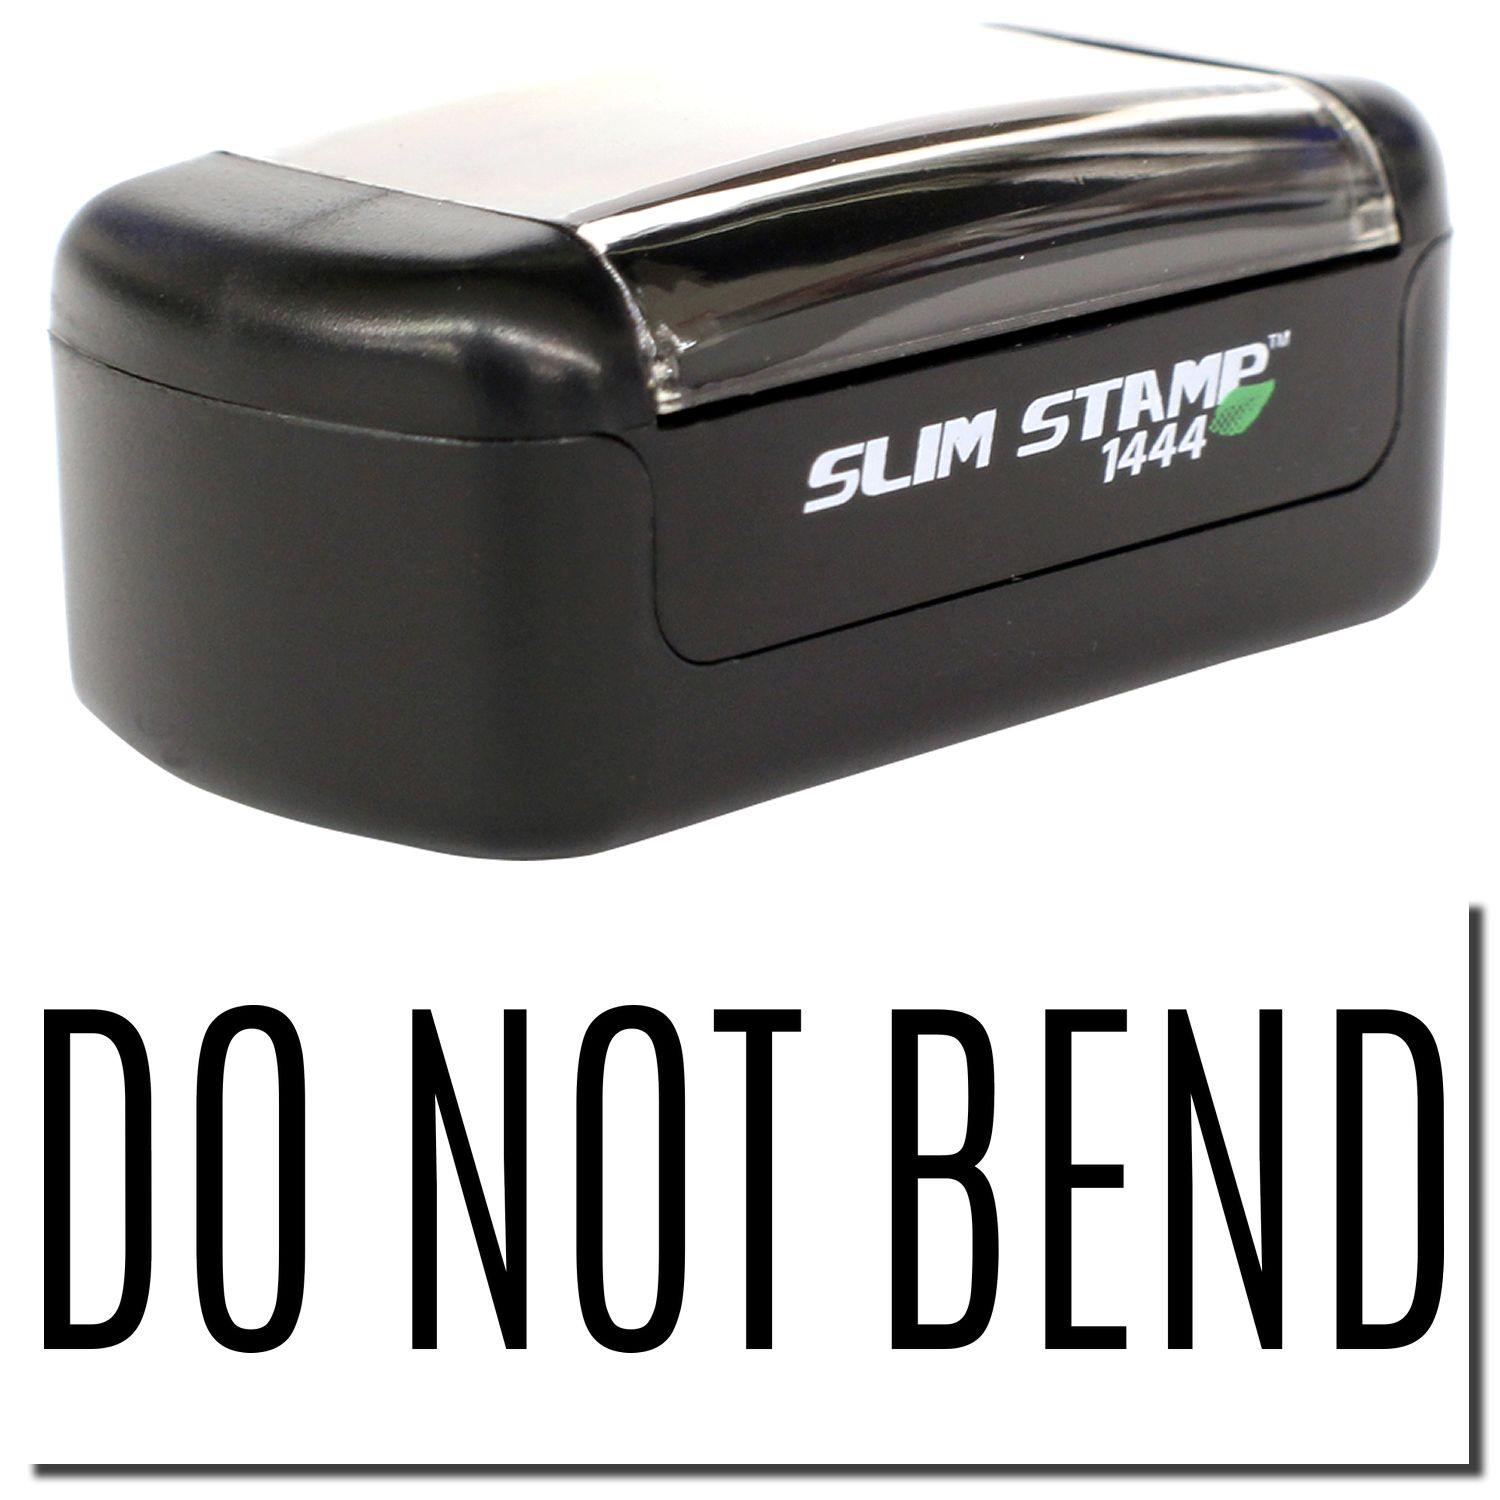 A stock office pre-inked stamp with a stamped image showing how the text "DO NOT BEND" is displayed after stamping.